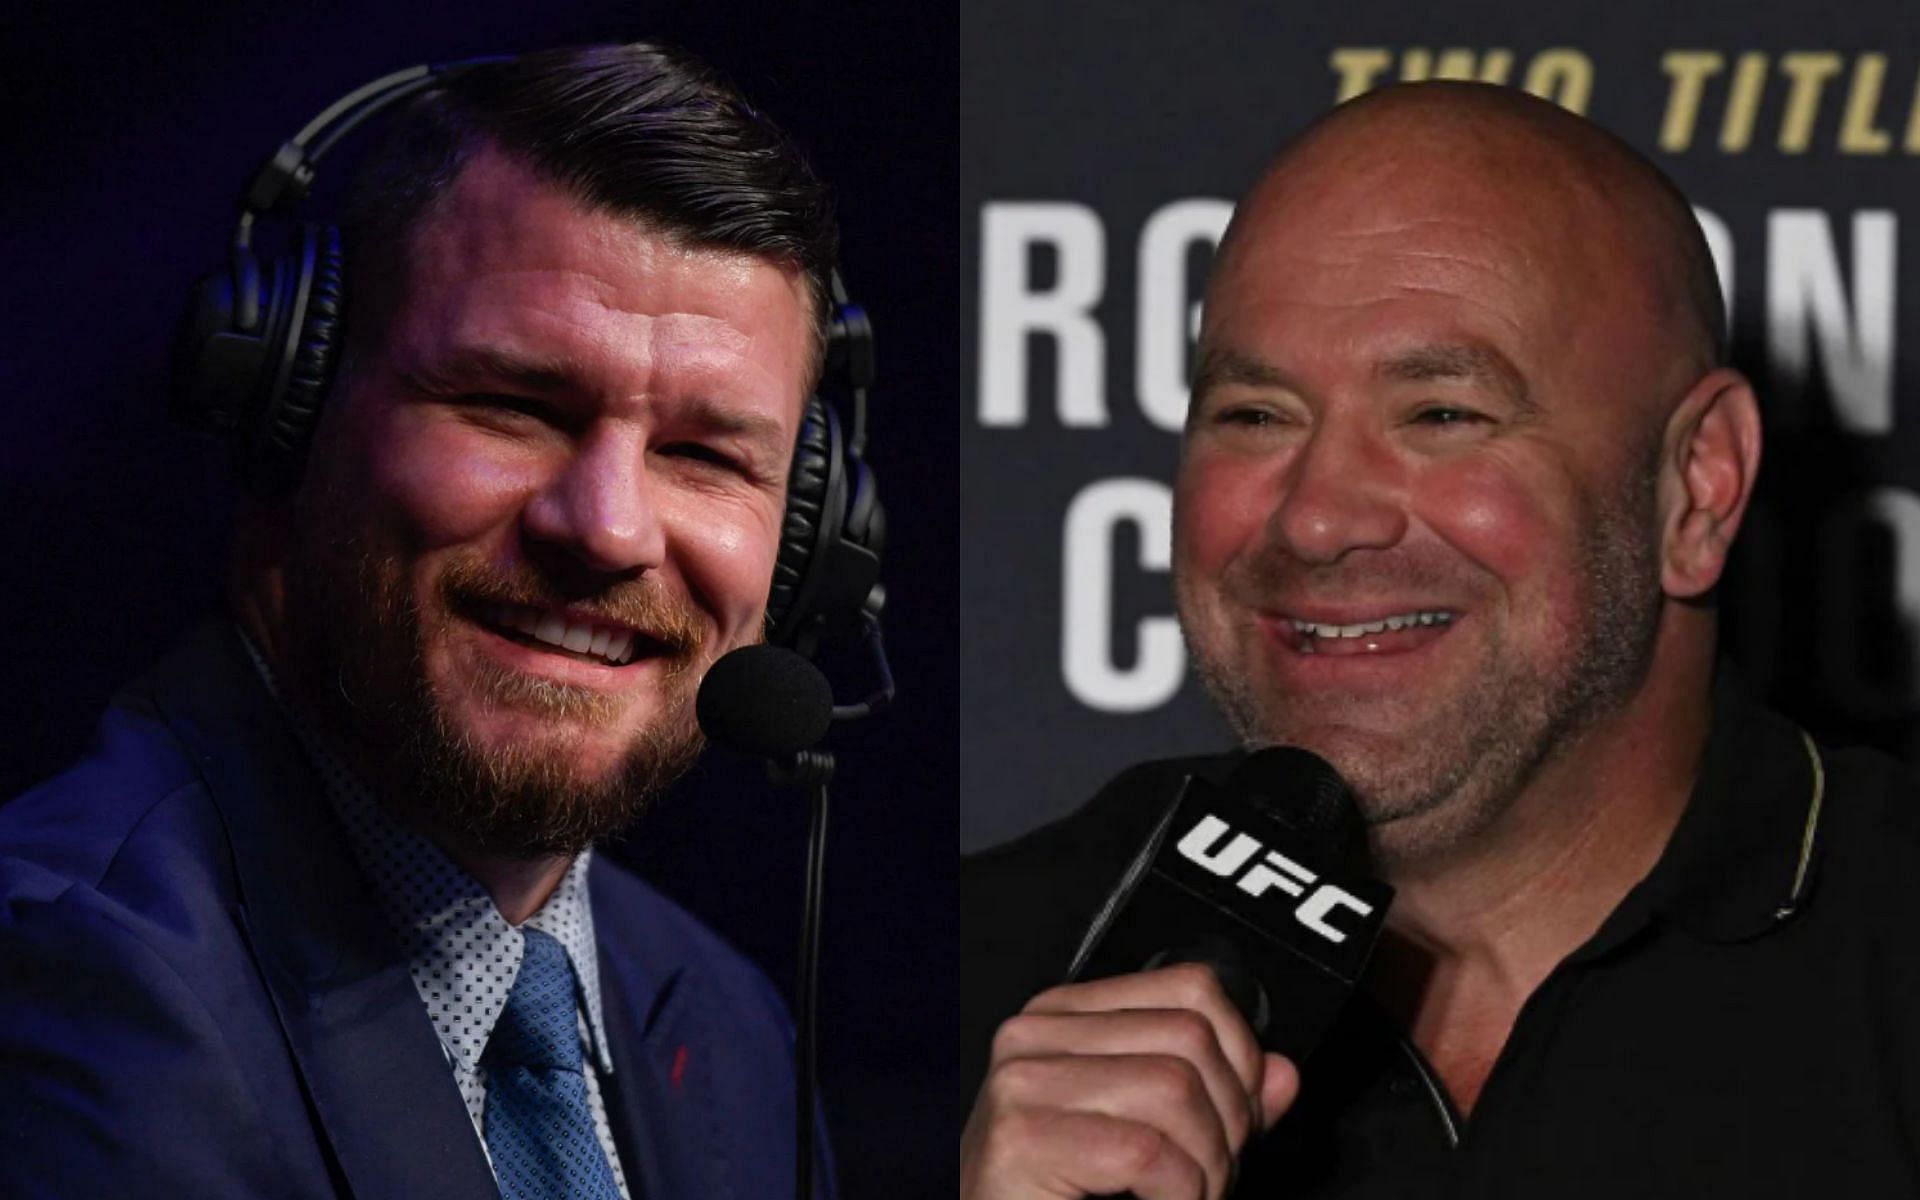 Michael Bisping (left) and Dana White (right)